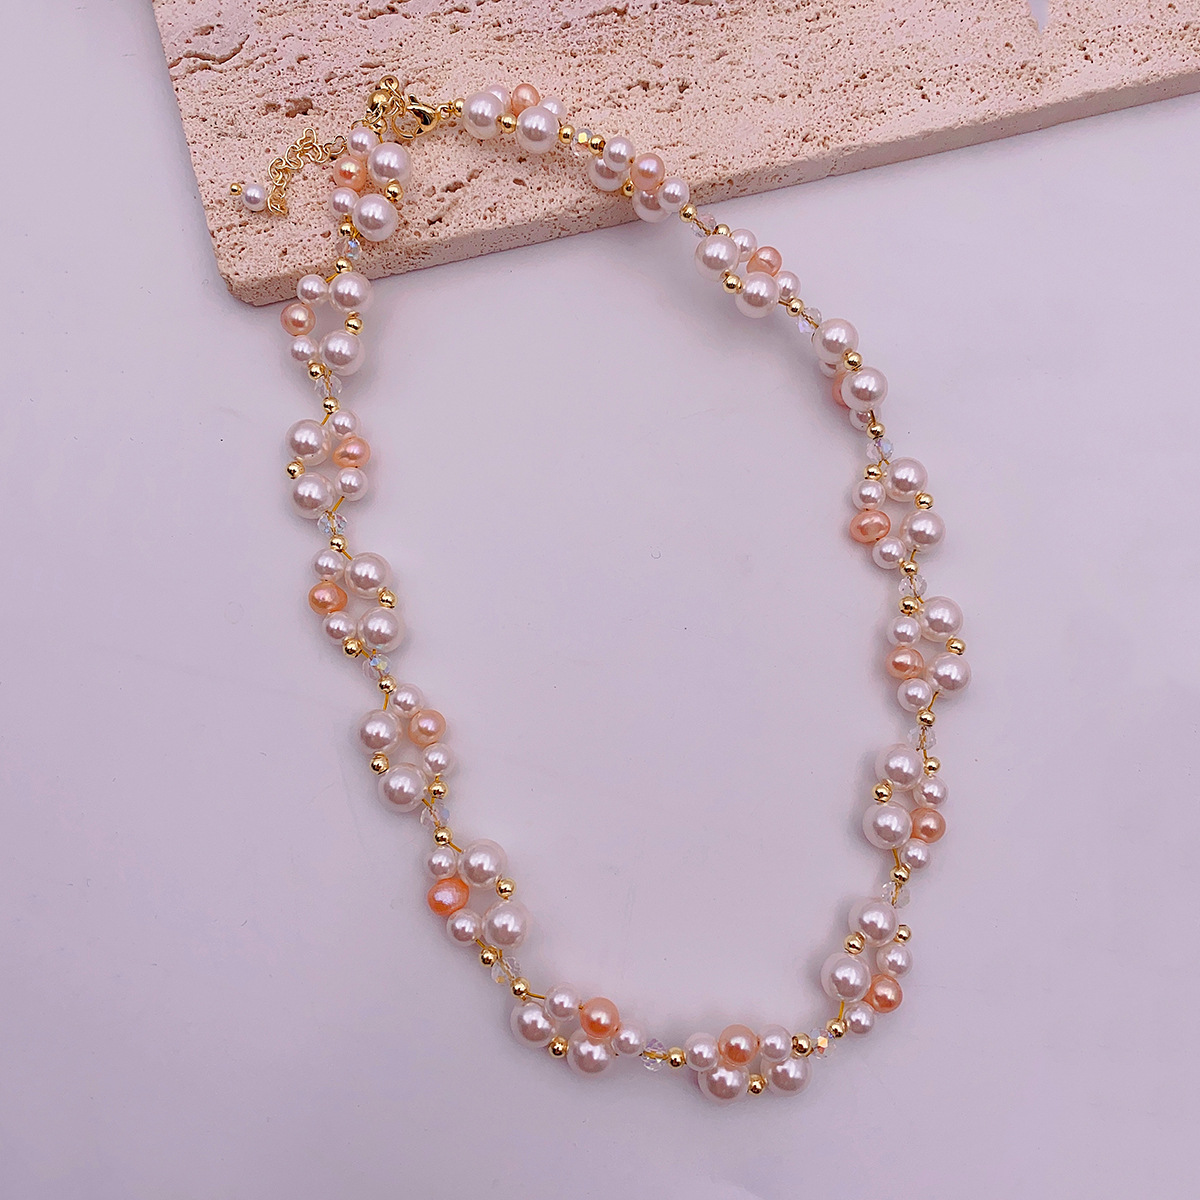 Glass beads   freshwater pearl necklace